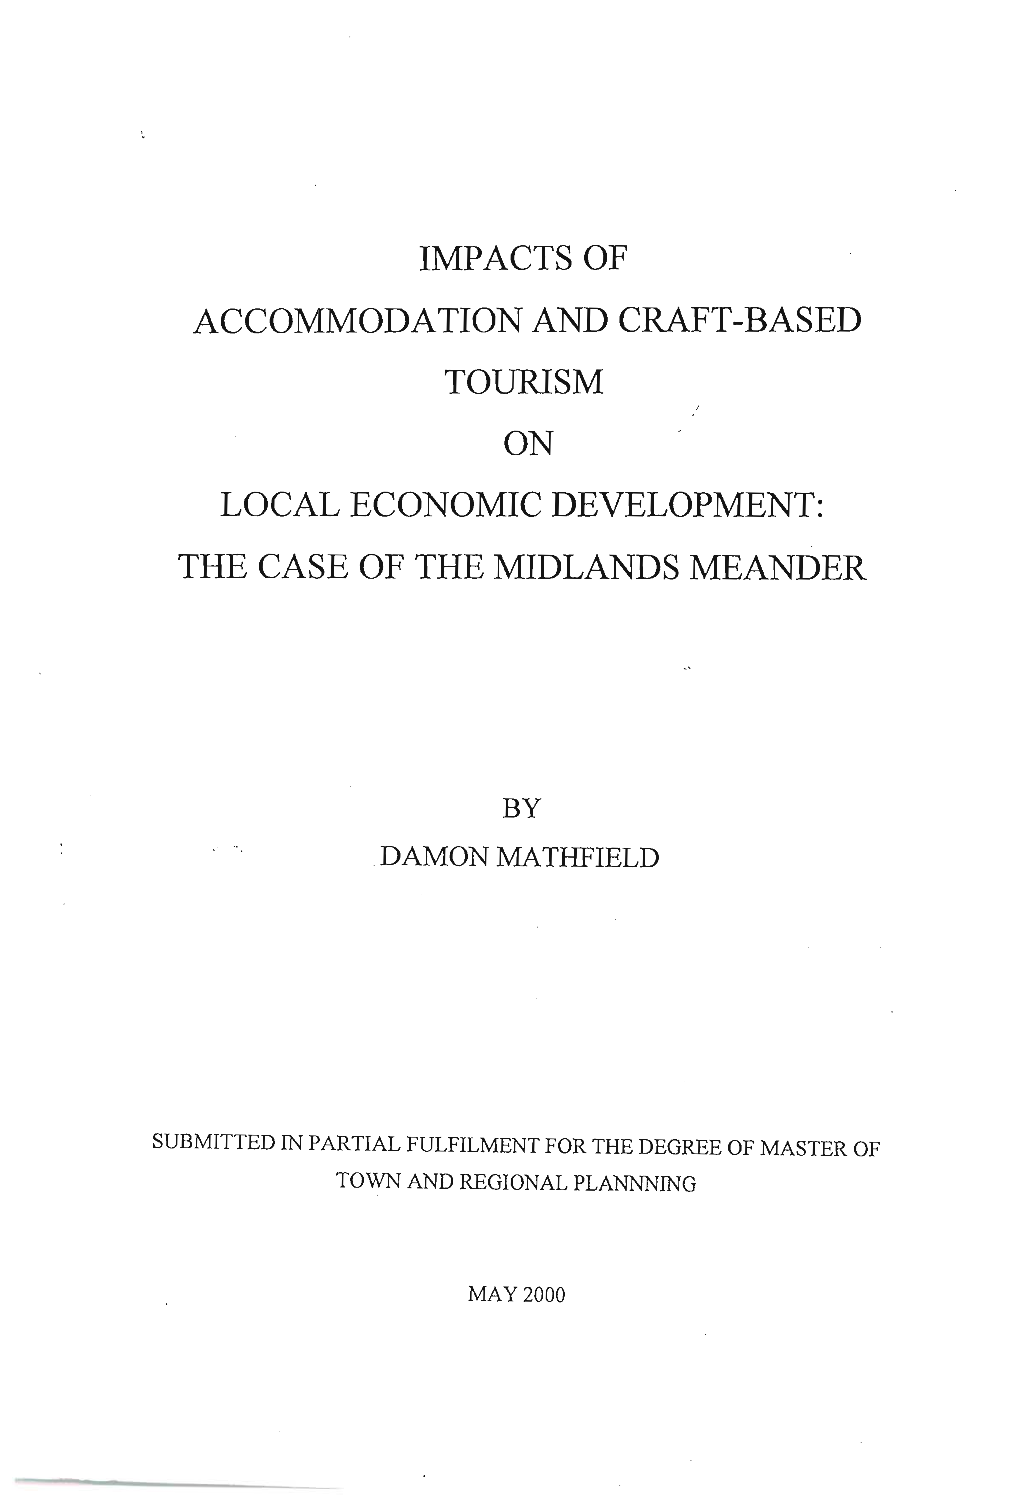 The Case of the Midlands Meander